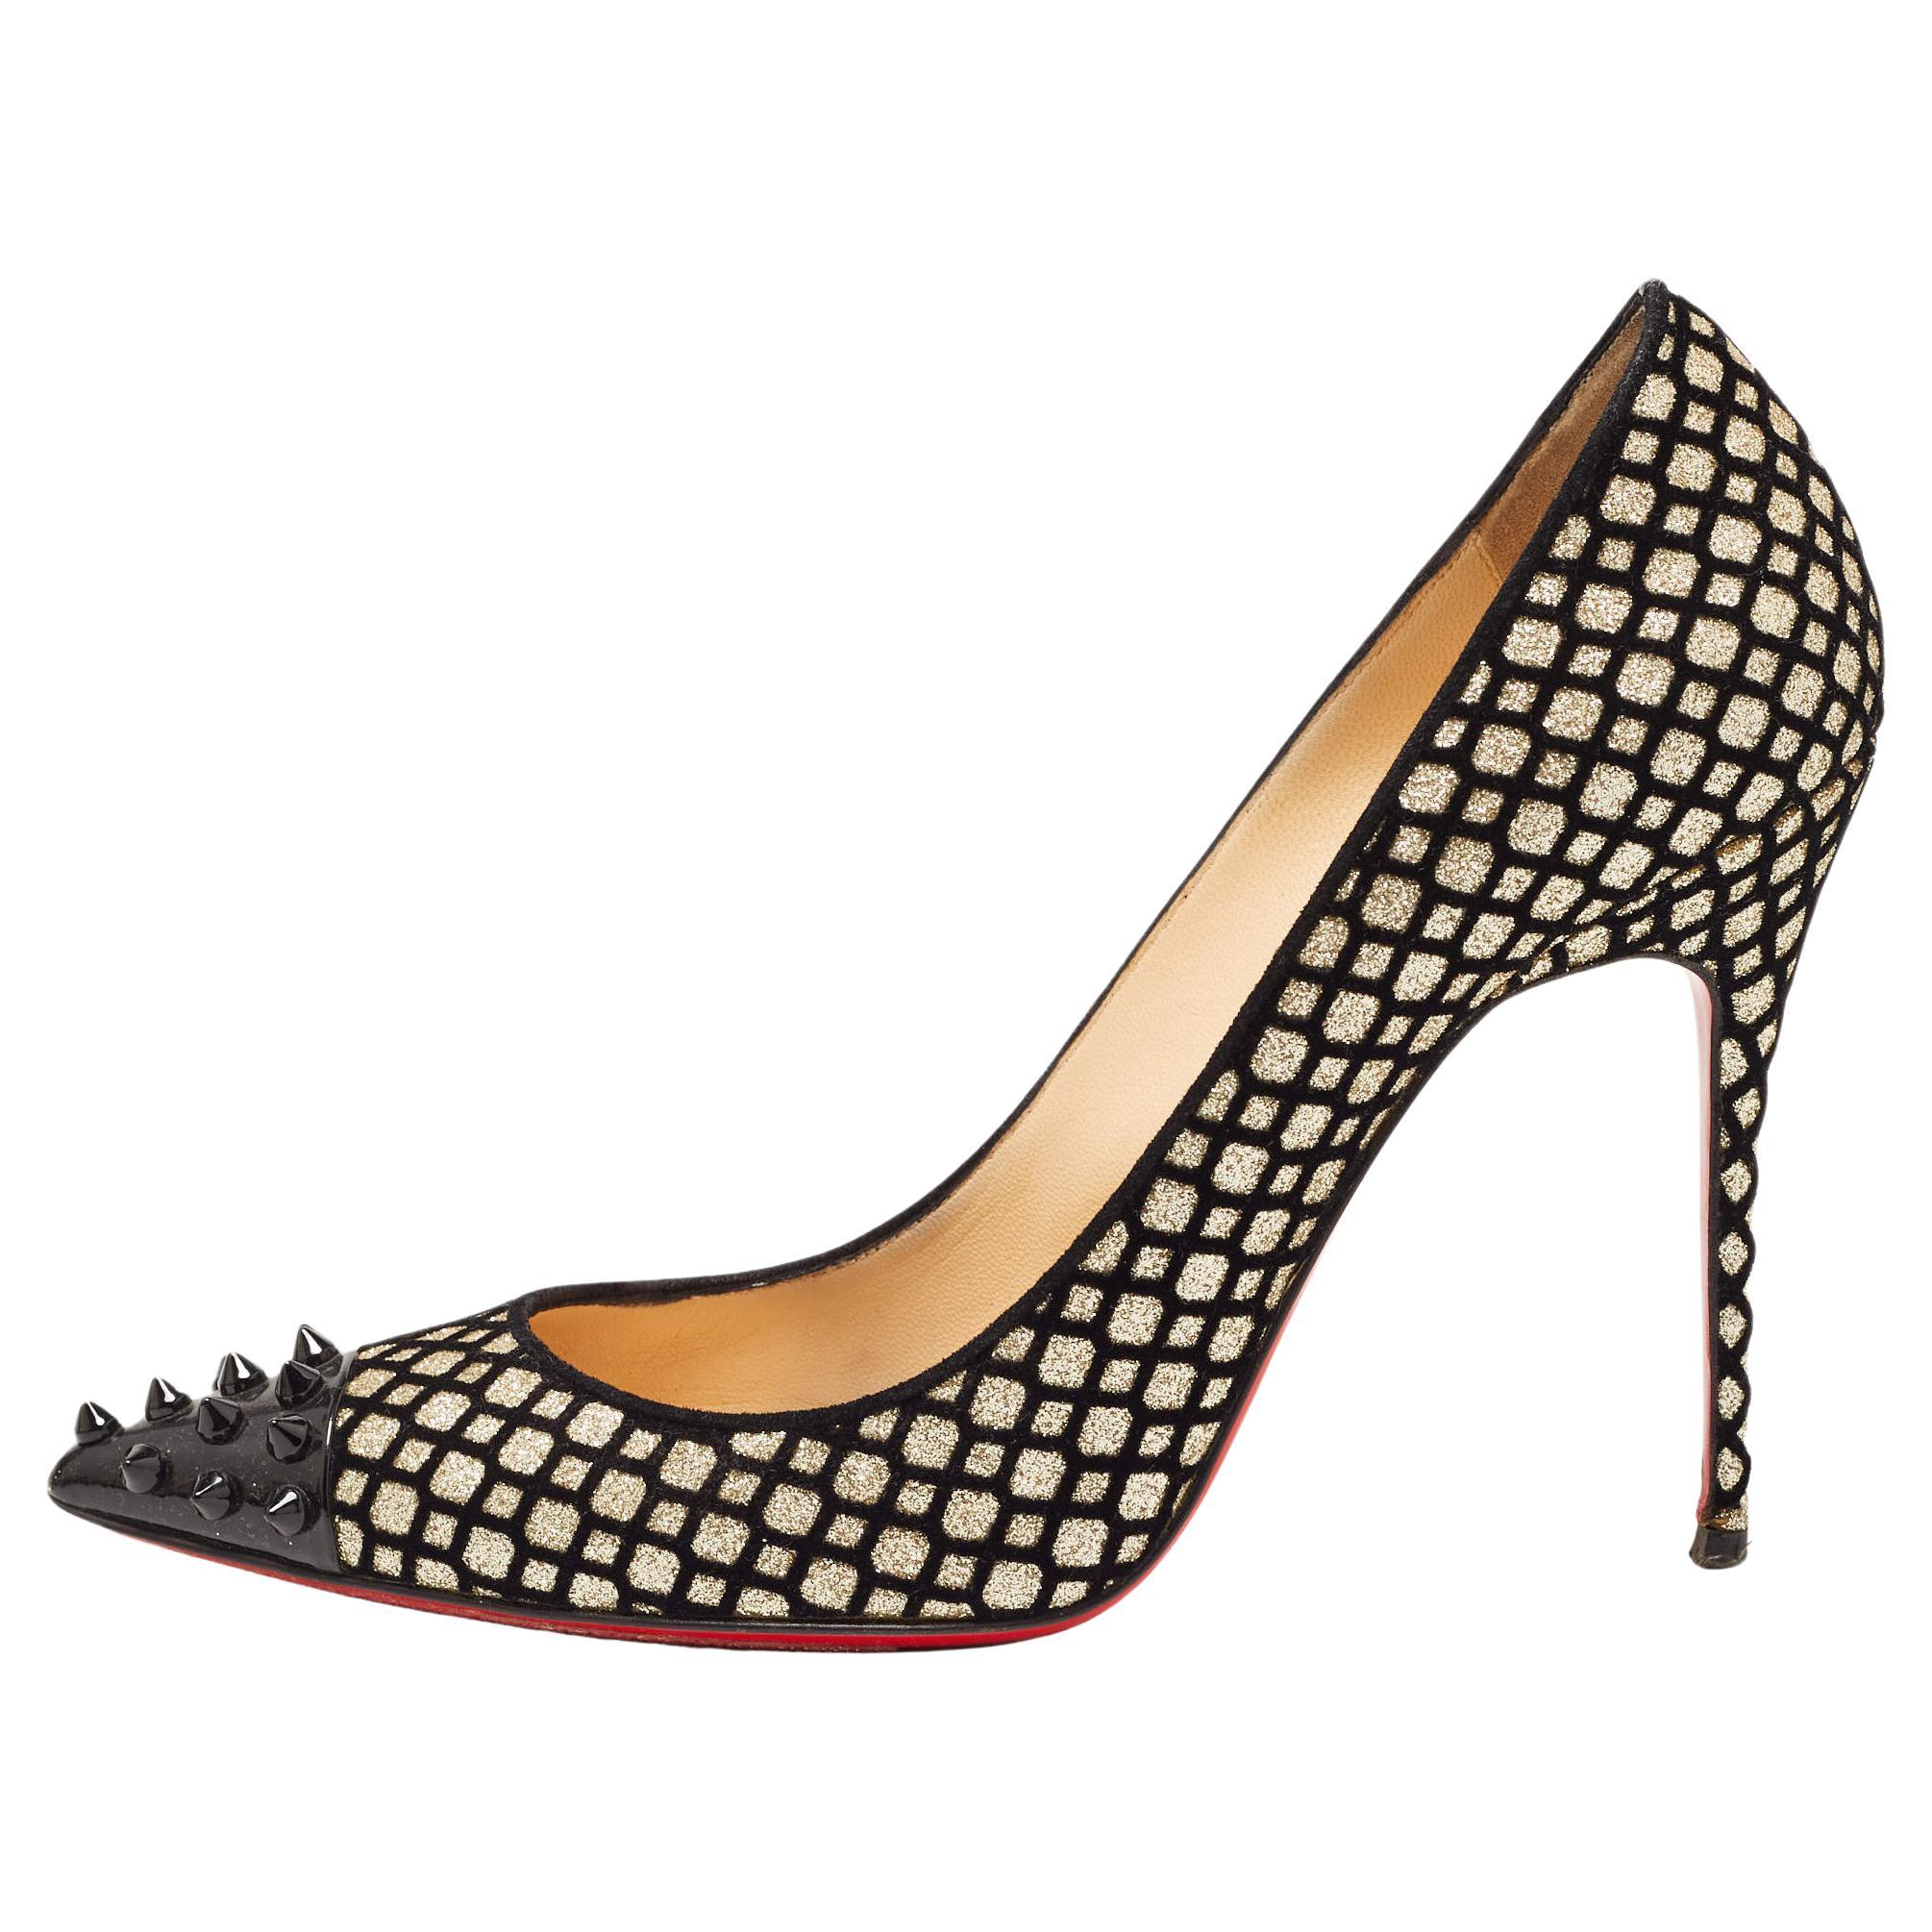 Christian Louboutin Black/Gold Suede and Glitter Geo Pumps Size 39